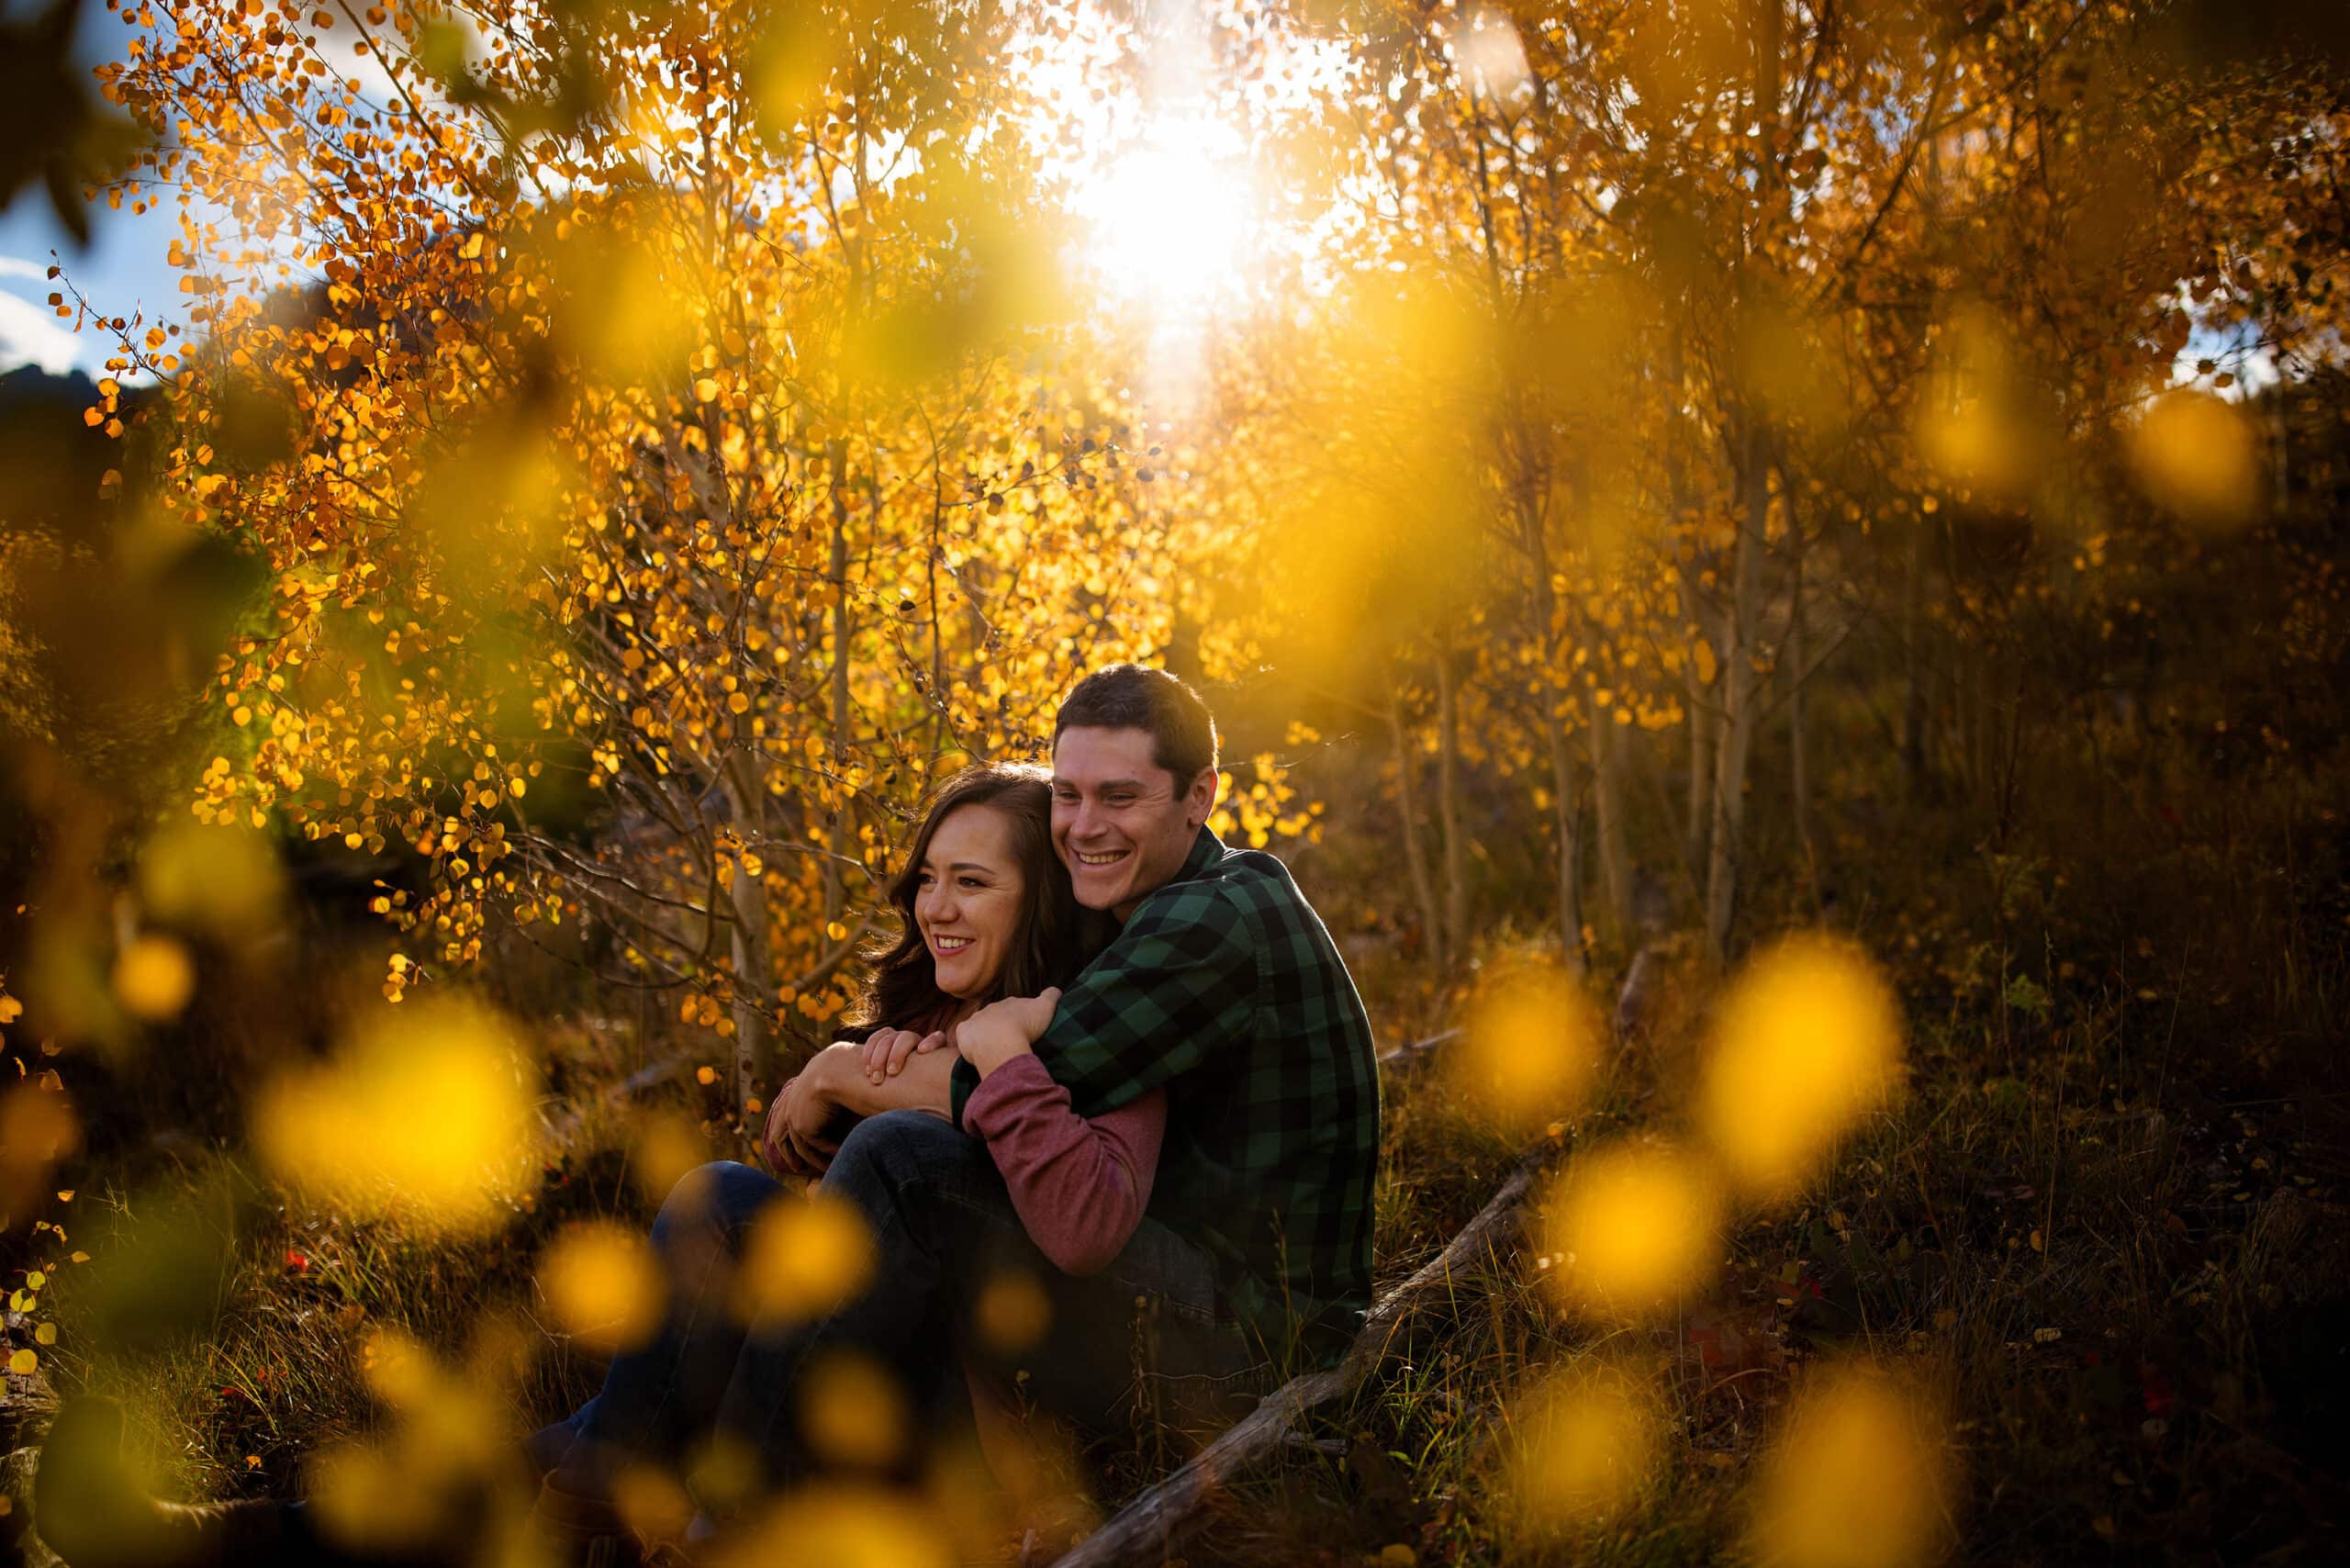 Danielle and Gabe sit on the side of a mountain as the sun shines through the trees behind them